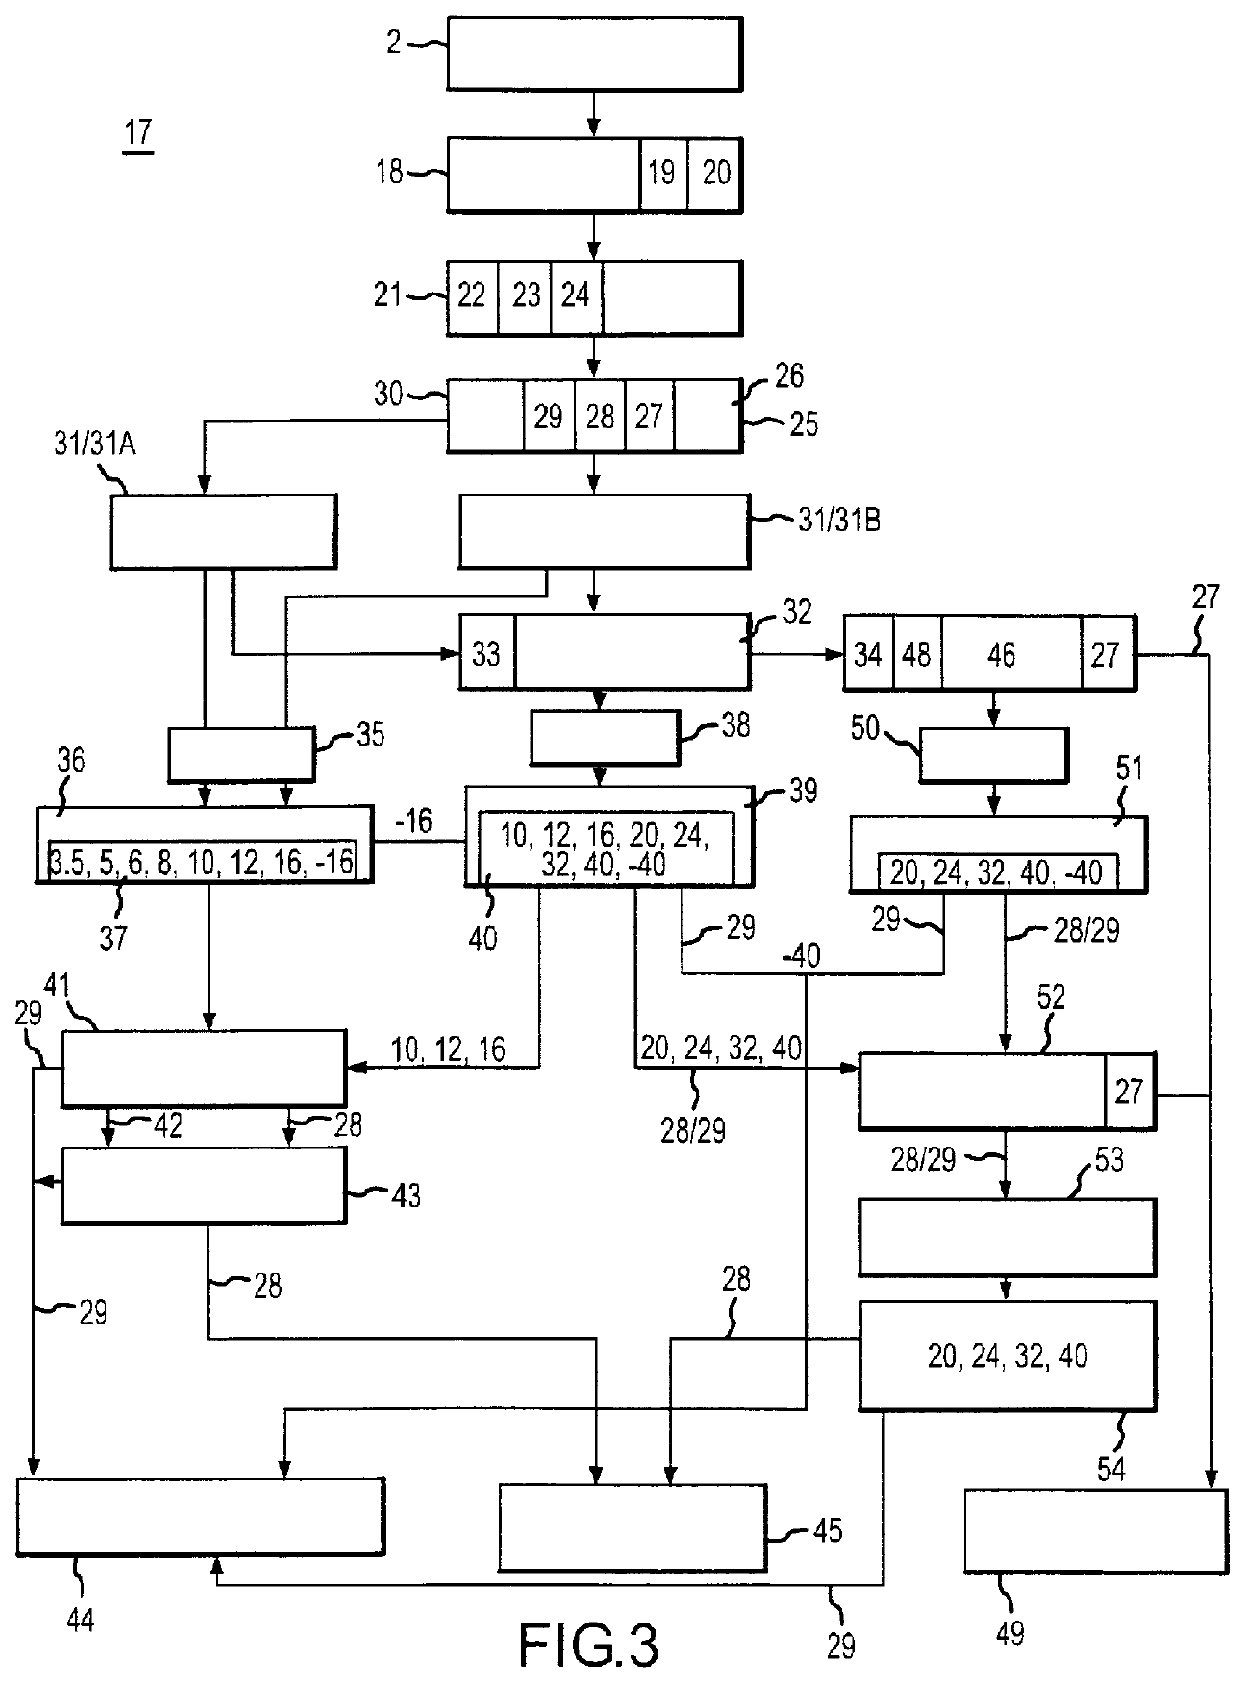 Grain fraction extraction material production system